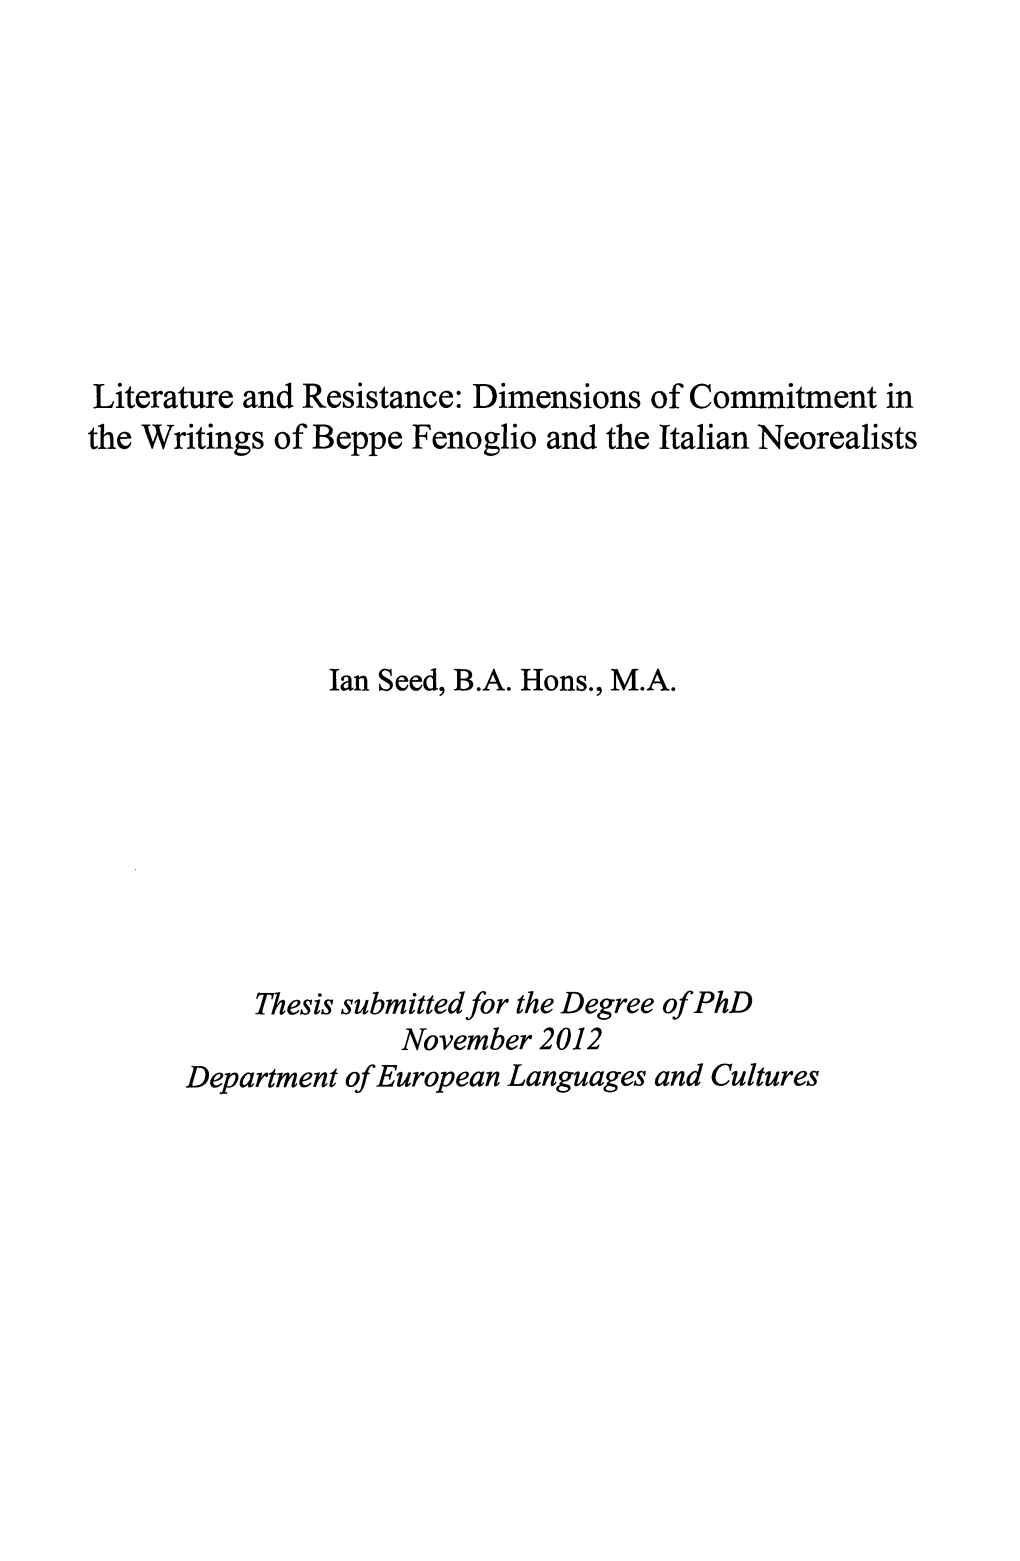 Dimensions of Commitment in the Writings of Beppe Fenoglio and the Italian Neorealists